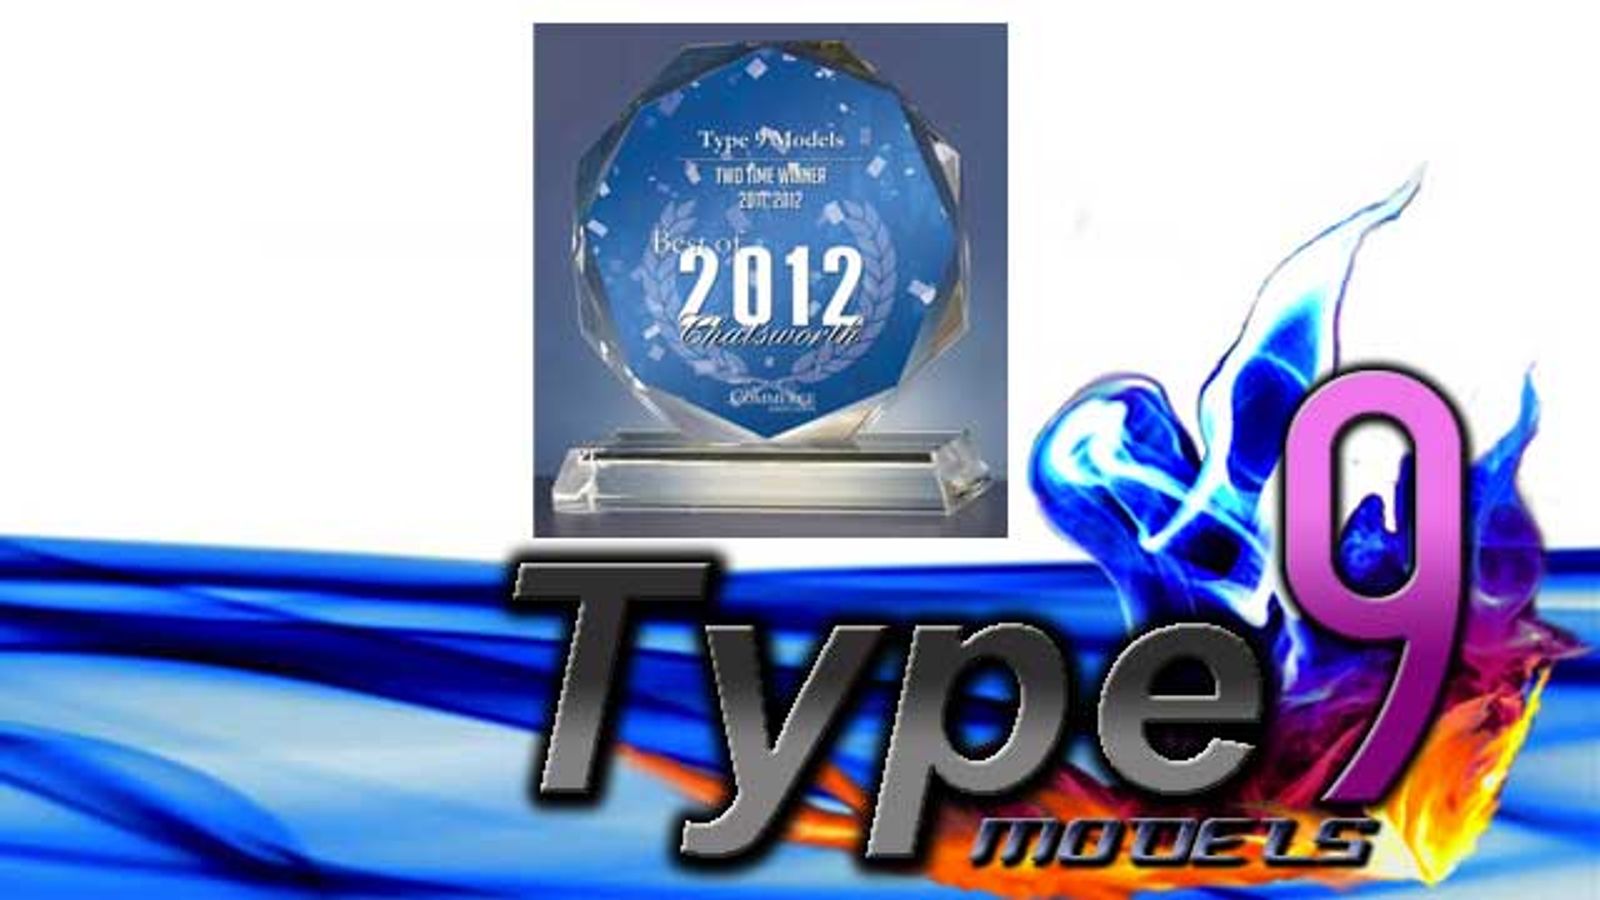 Type 9 Models Receives 2012 Best of Chatsworth Award